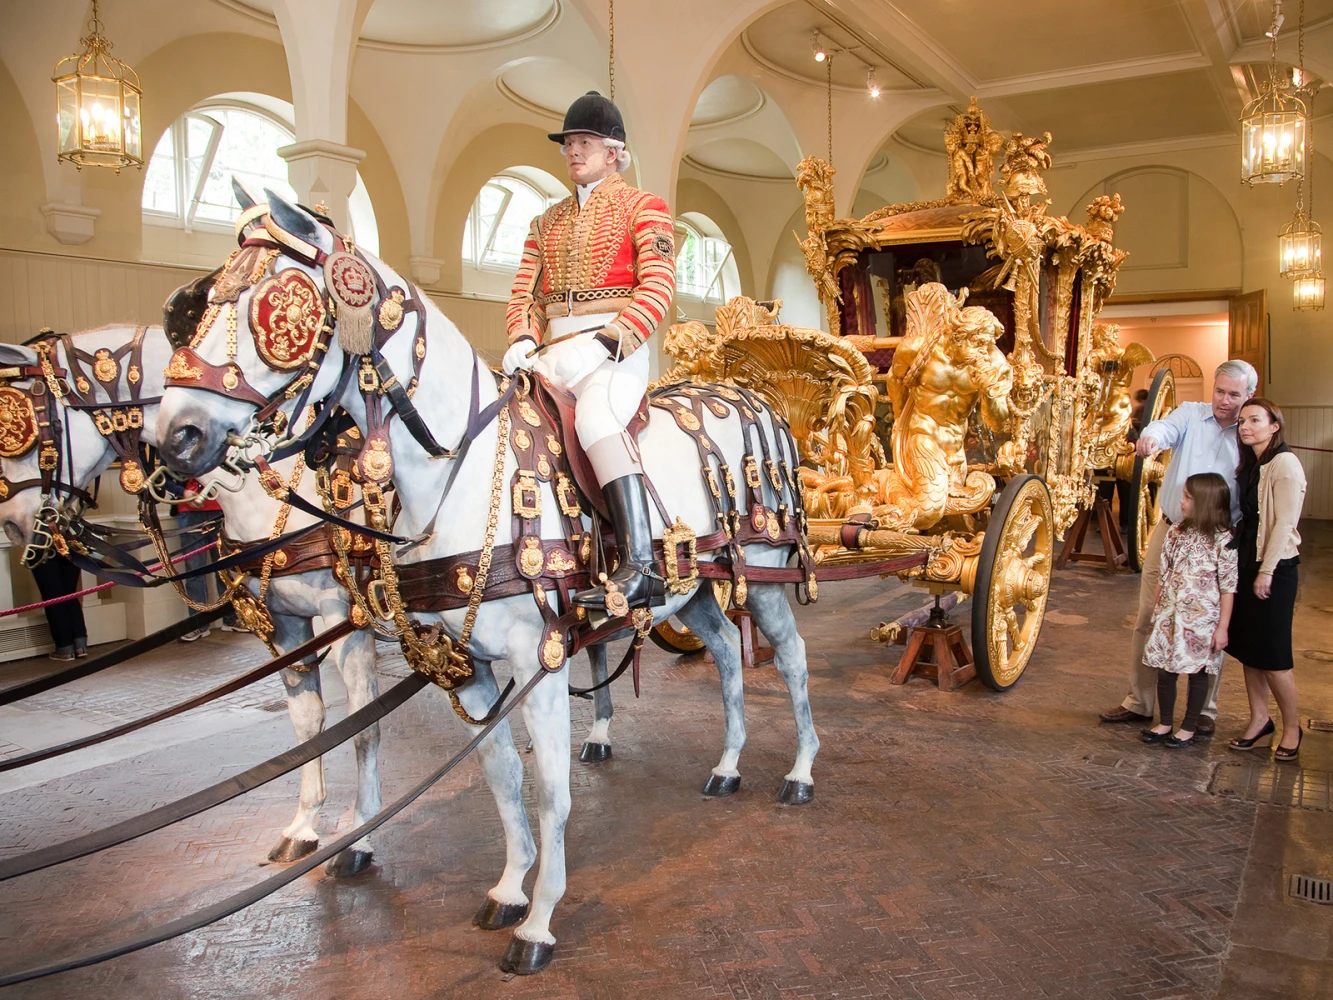 Buckingham Palace Royal Mews: What to expect - 1